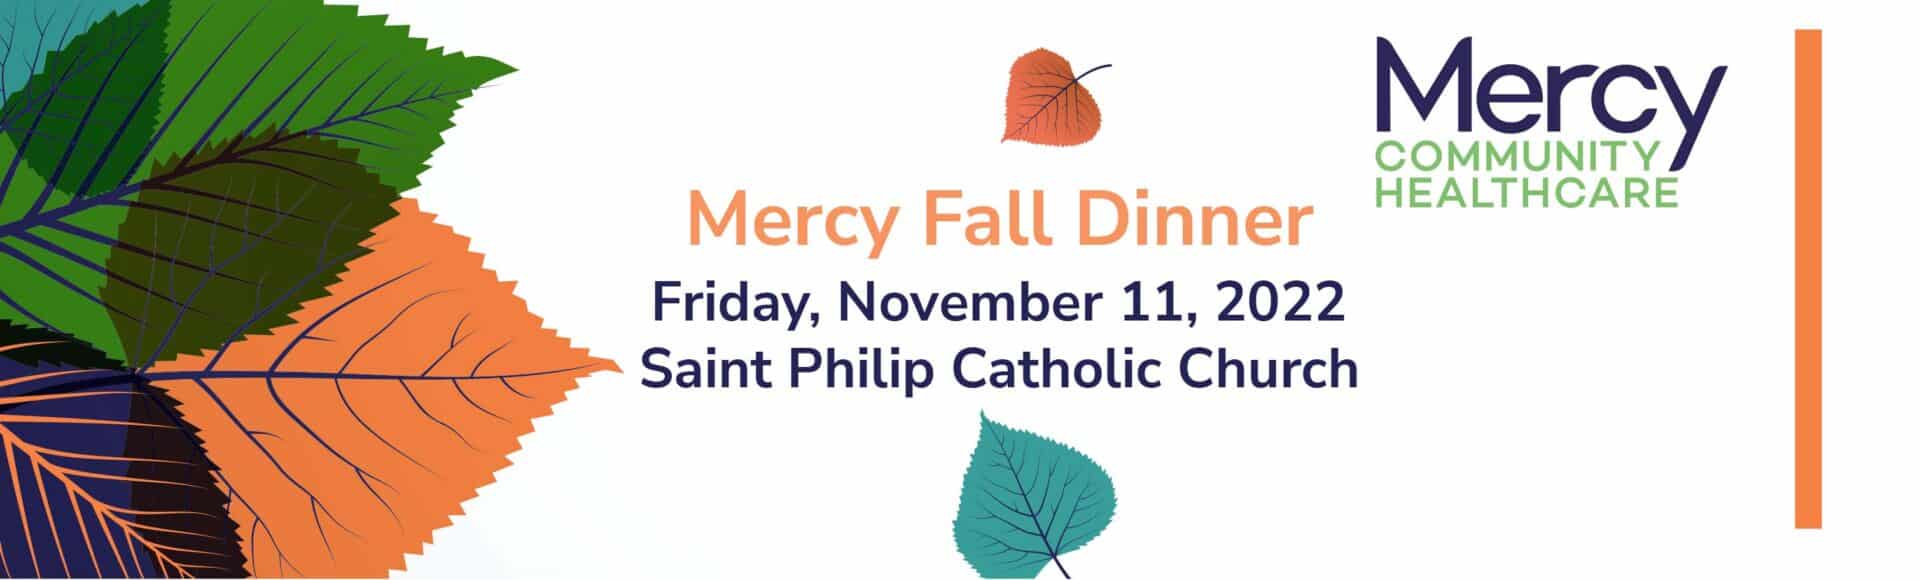 Mercy Fall Dinner event in Franklin, Tennessee, silent auction, drinks, and hors d'oeuvres followed by dinner, music, and a program highlighting Mercy's mental health services.